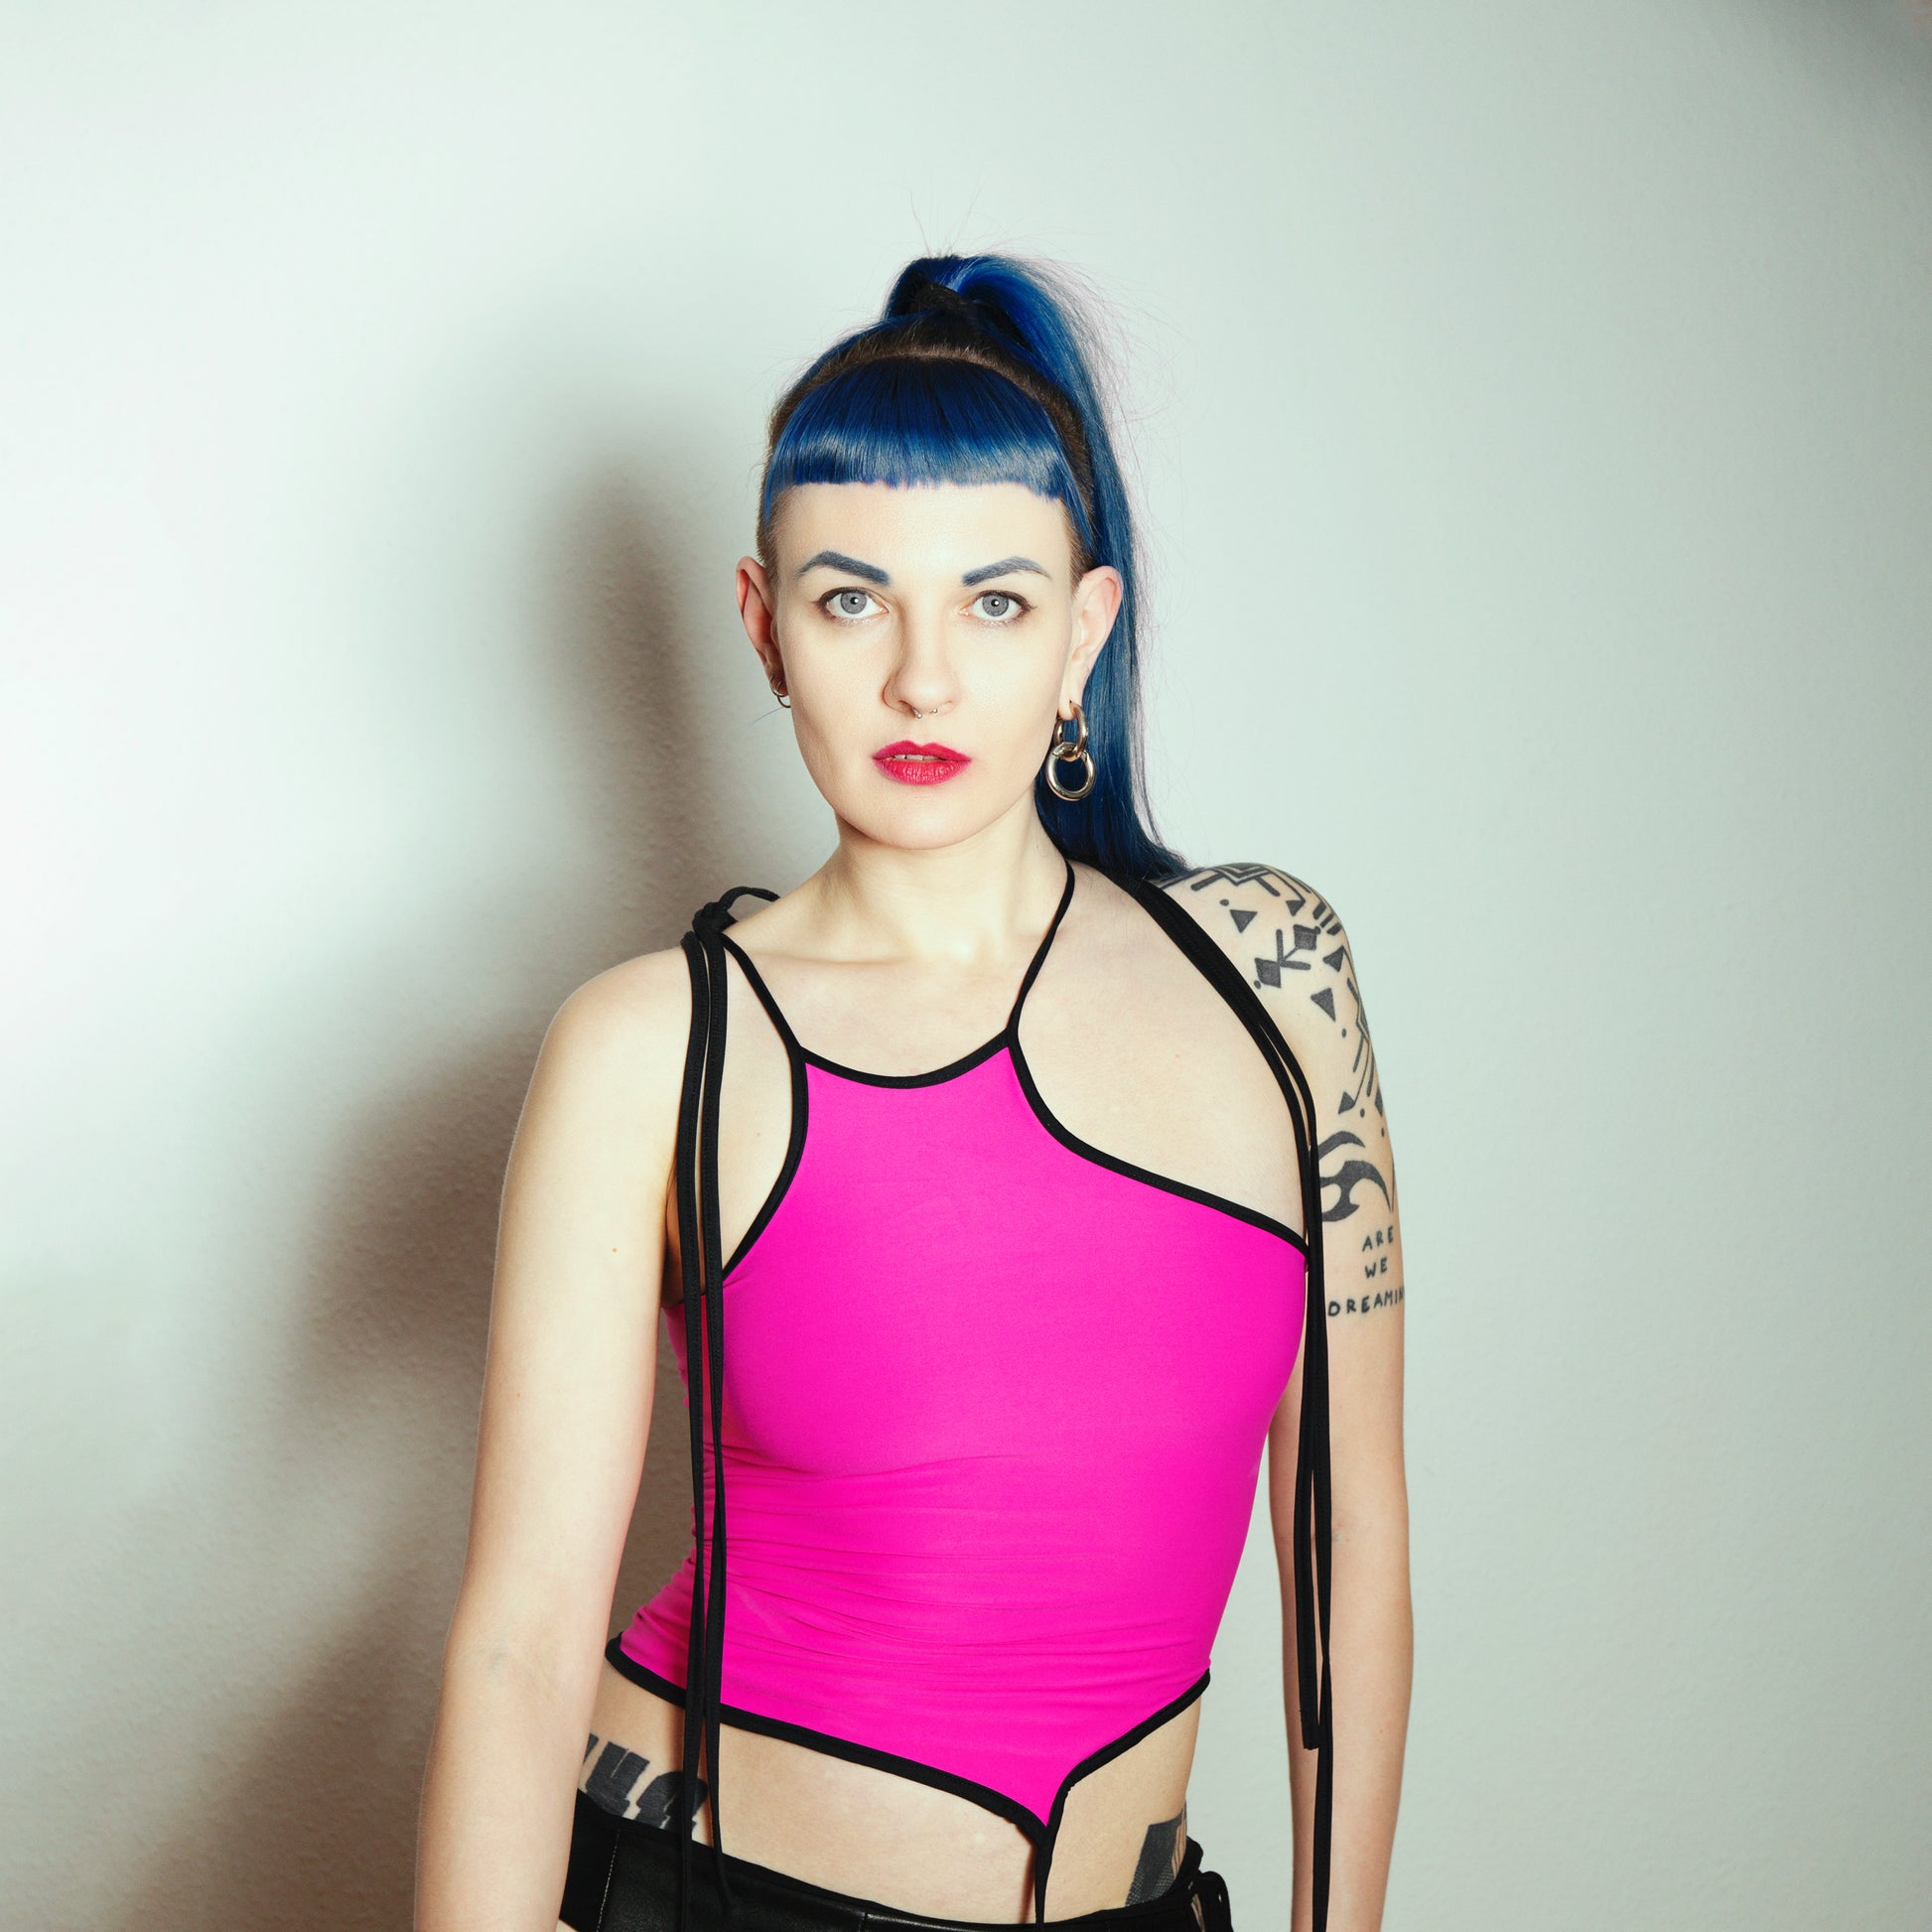 neon pink top with laces, woman with blue hair